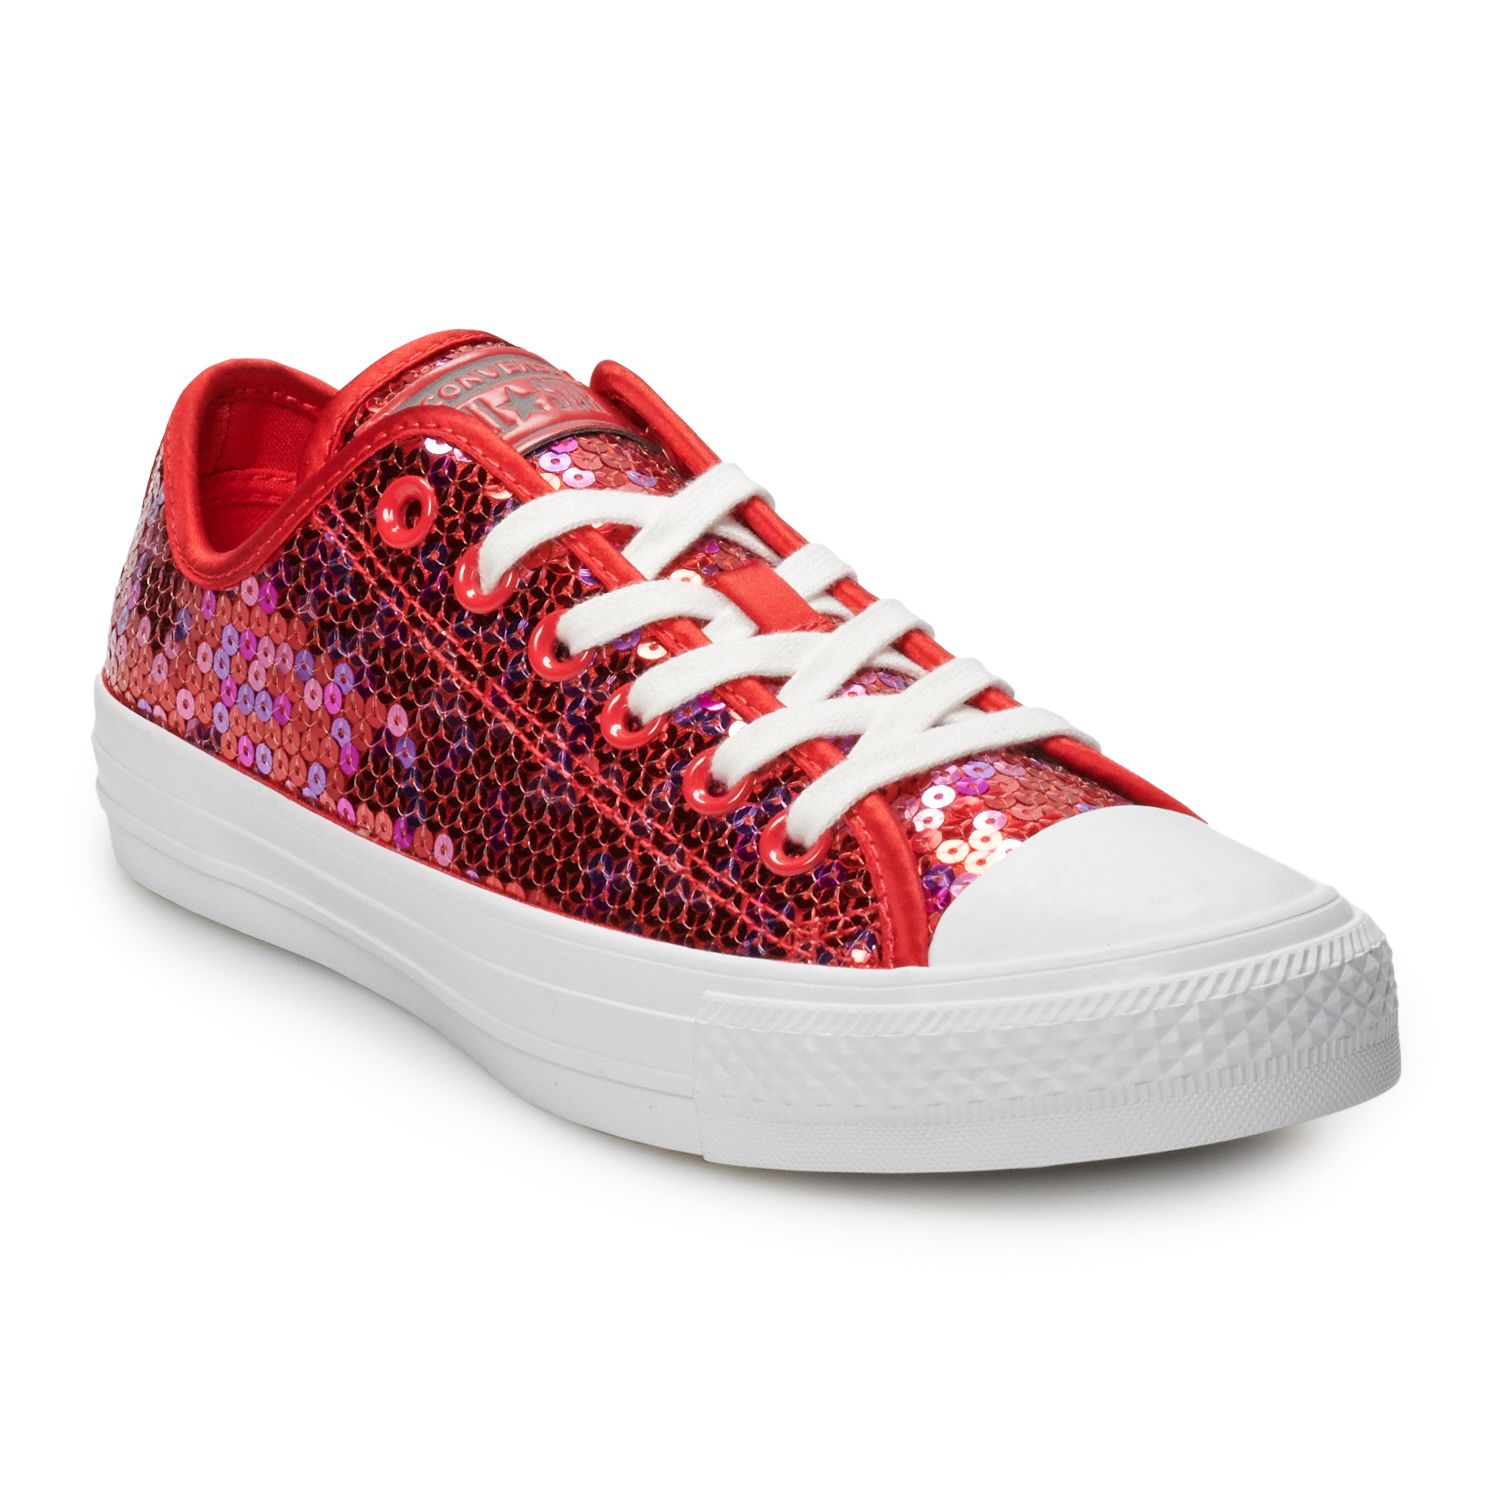 red sequin converse womens